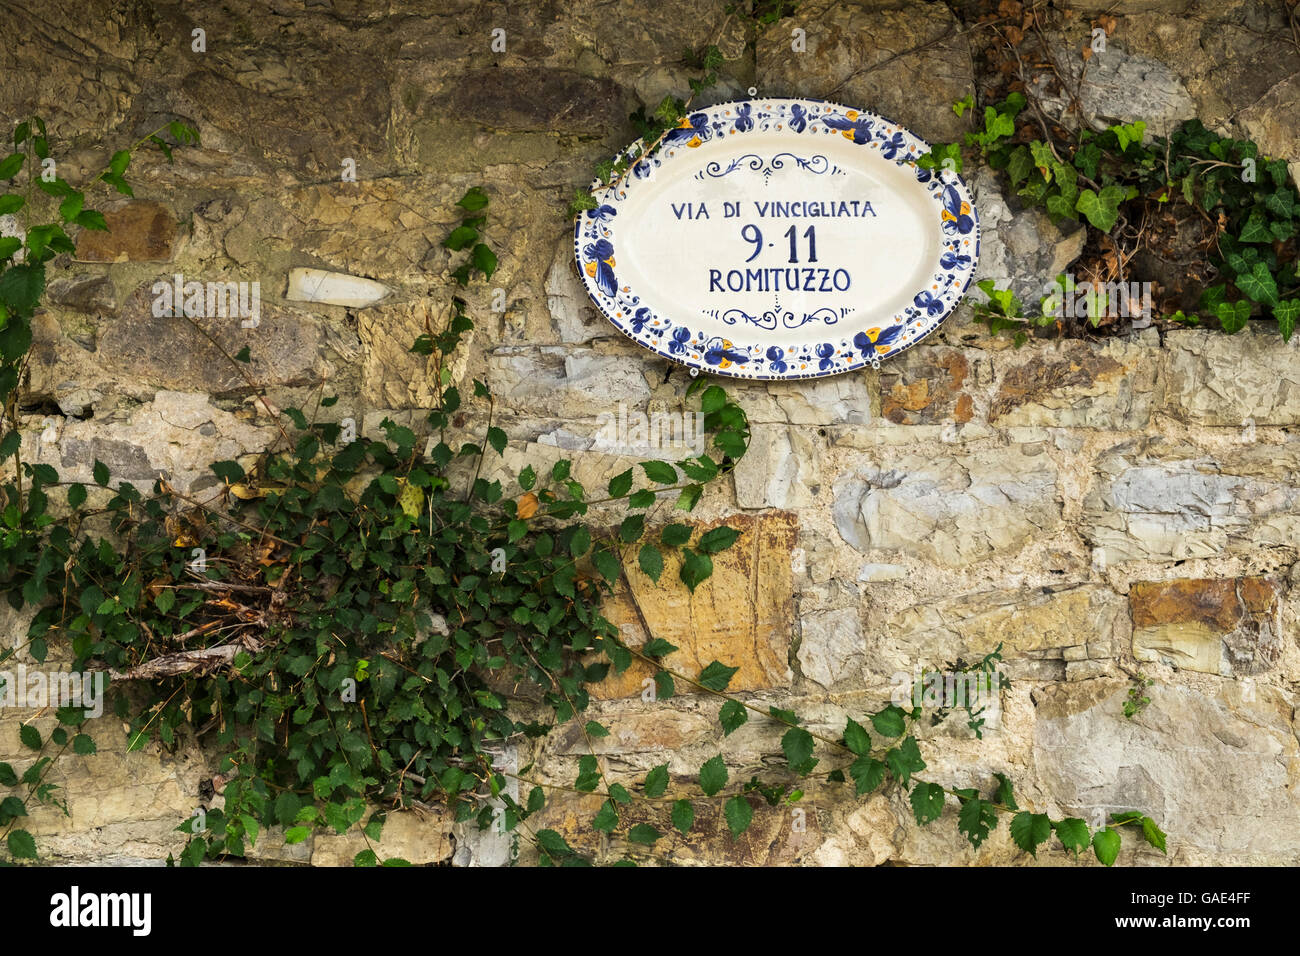 Ceramic plate with street name and house numbers, Via di Vincigliata, Fiesole, Tuscany, Italy Stock Photo